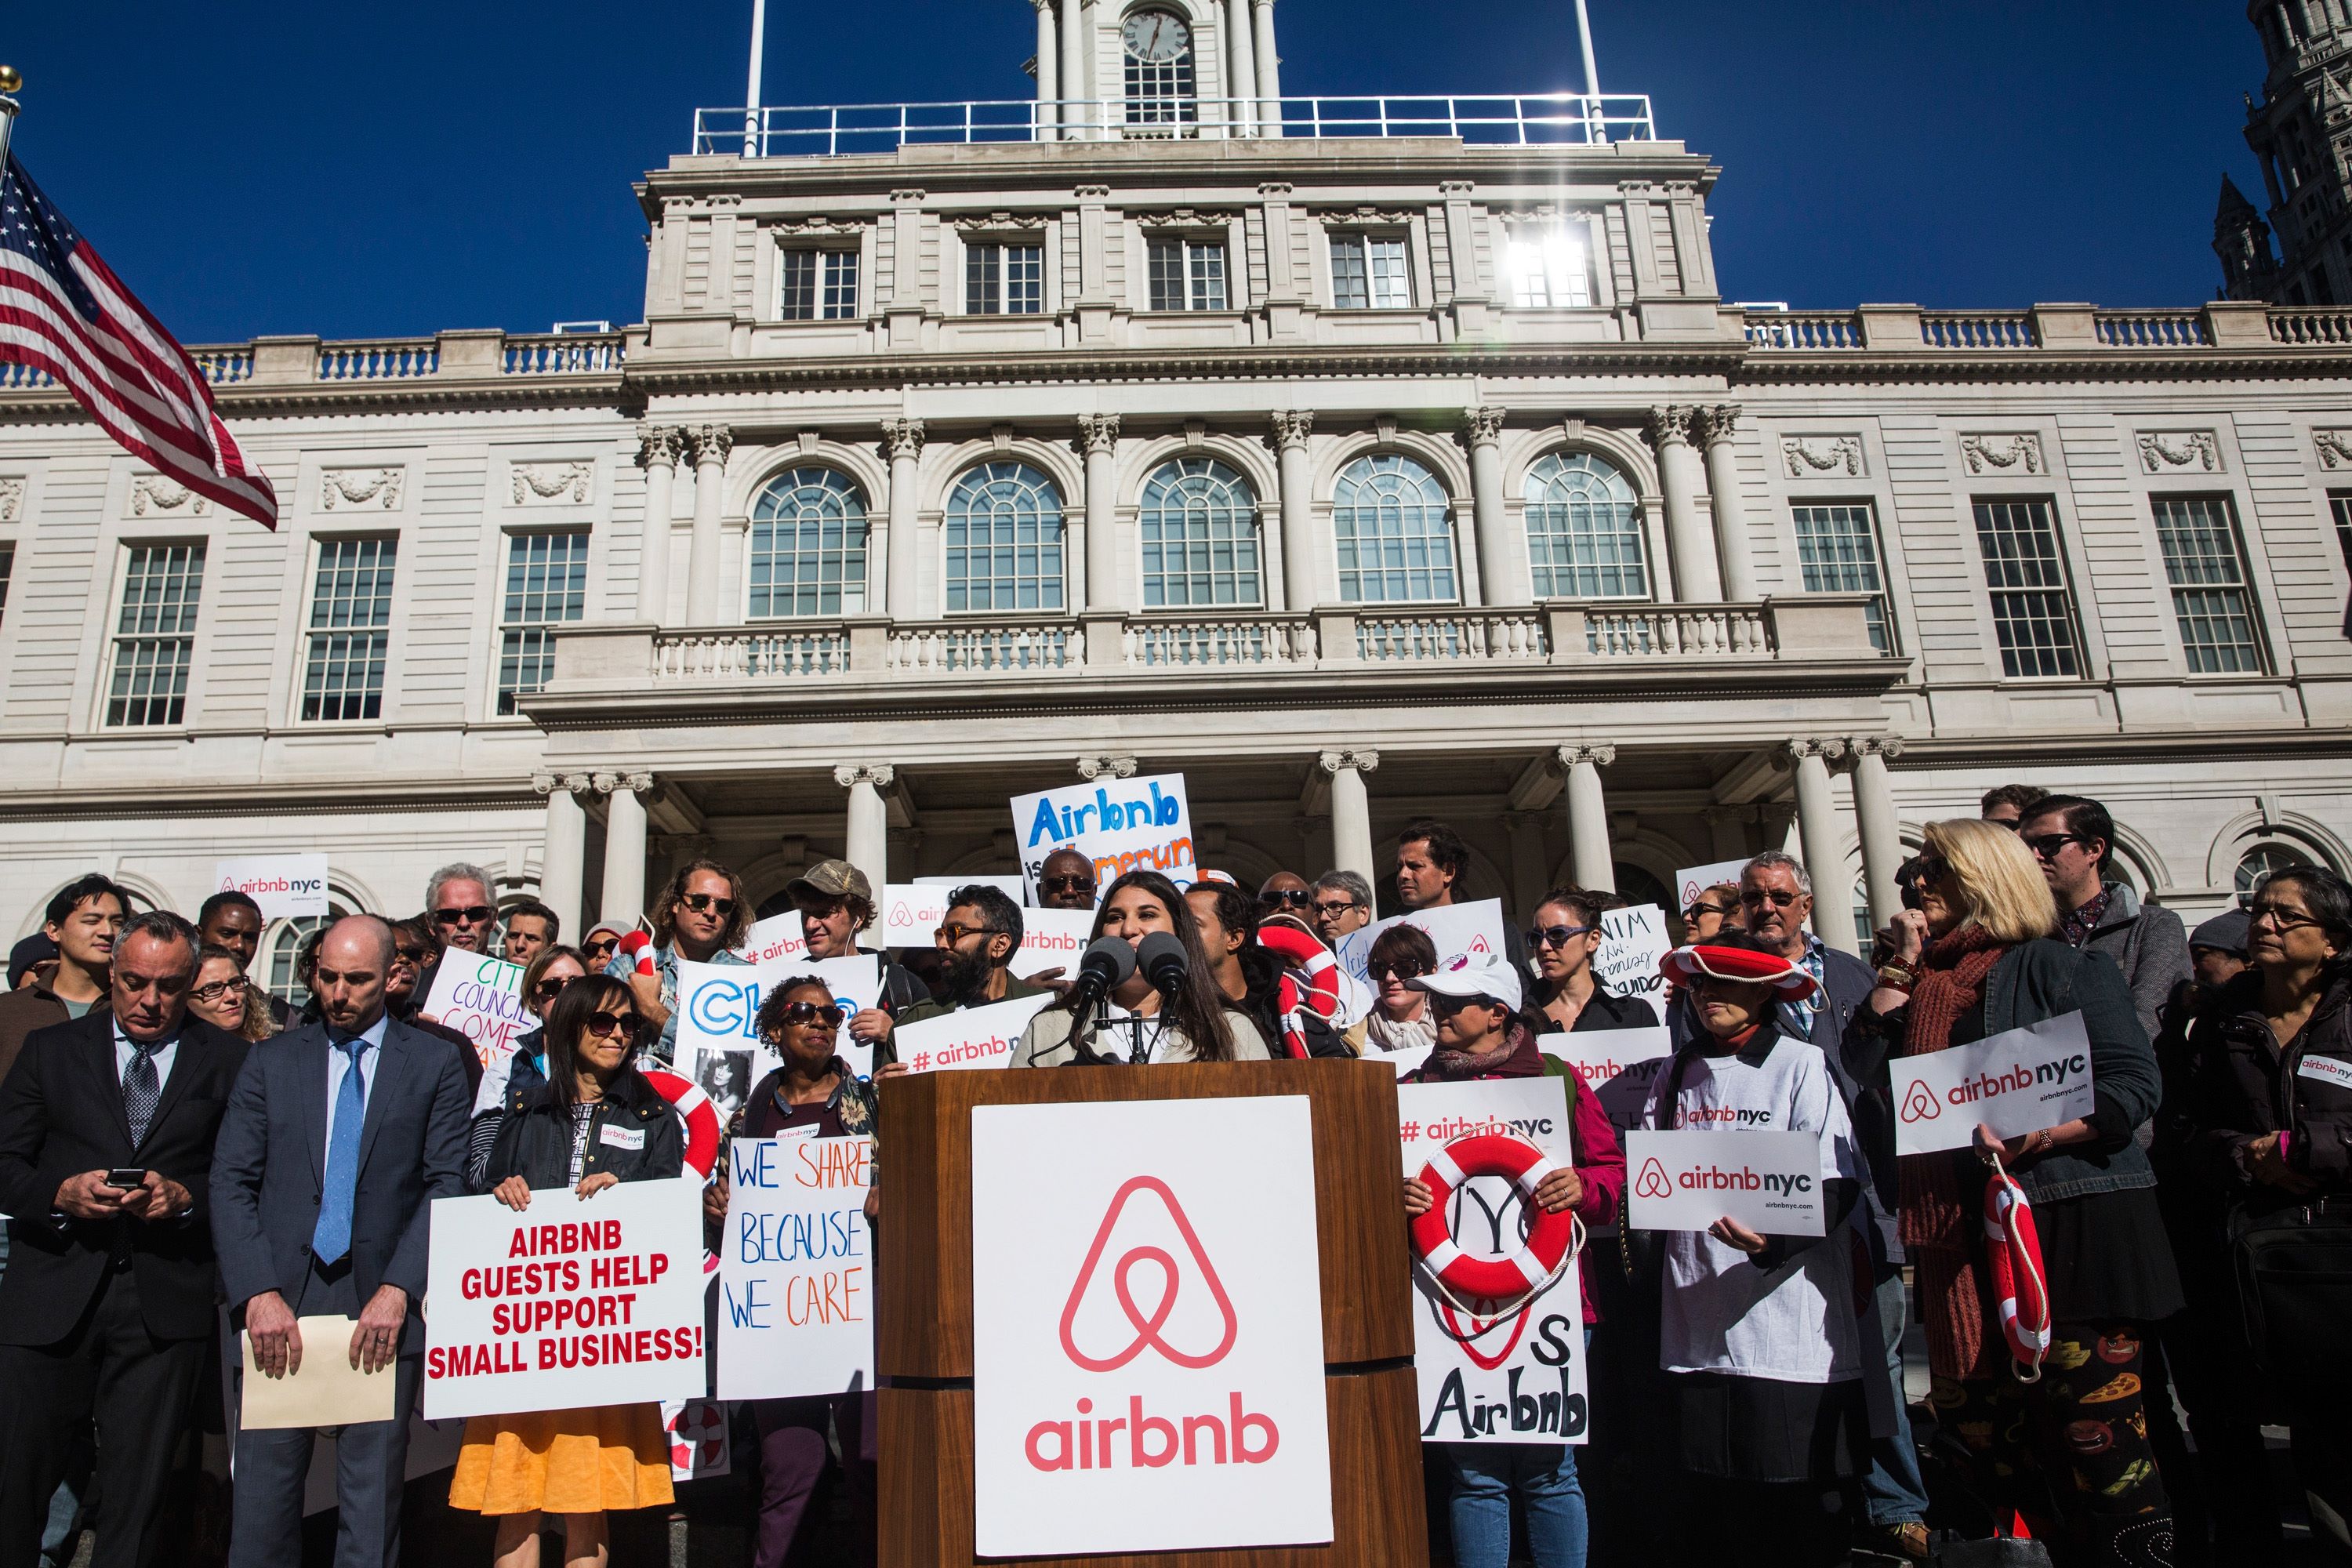 NEW YORK, NY - OCTOBER 30: Supporters of Airbnb hold a rally on the steps of New York City Hall showing support for the company on October 30, 2015 in New York City. The New York City council is currently debating how to regulate the controversial company. Andrew Burton/Getty Images/AFP == FOR NEWSPAPERS, INTERNET, TELCOS & TELEVISION USE ONLY ==